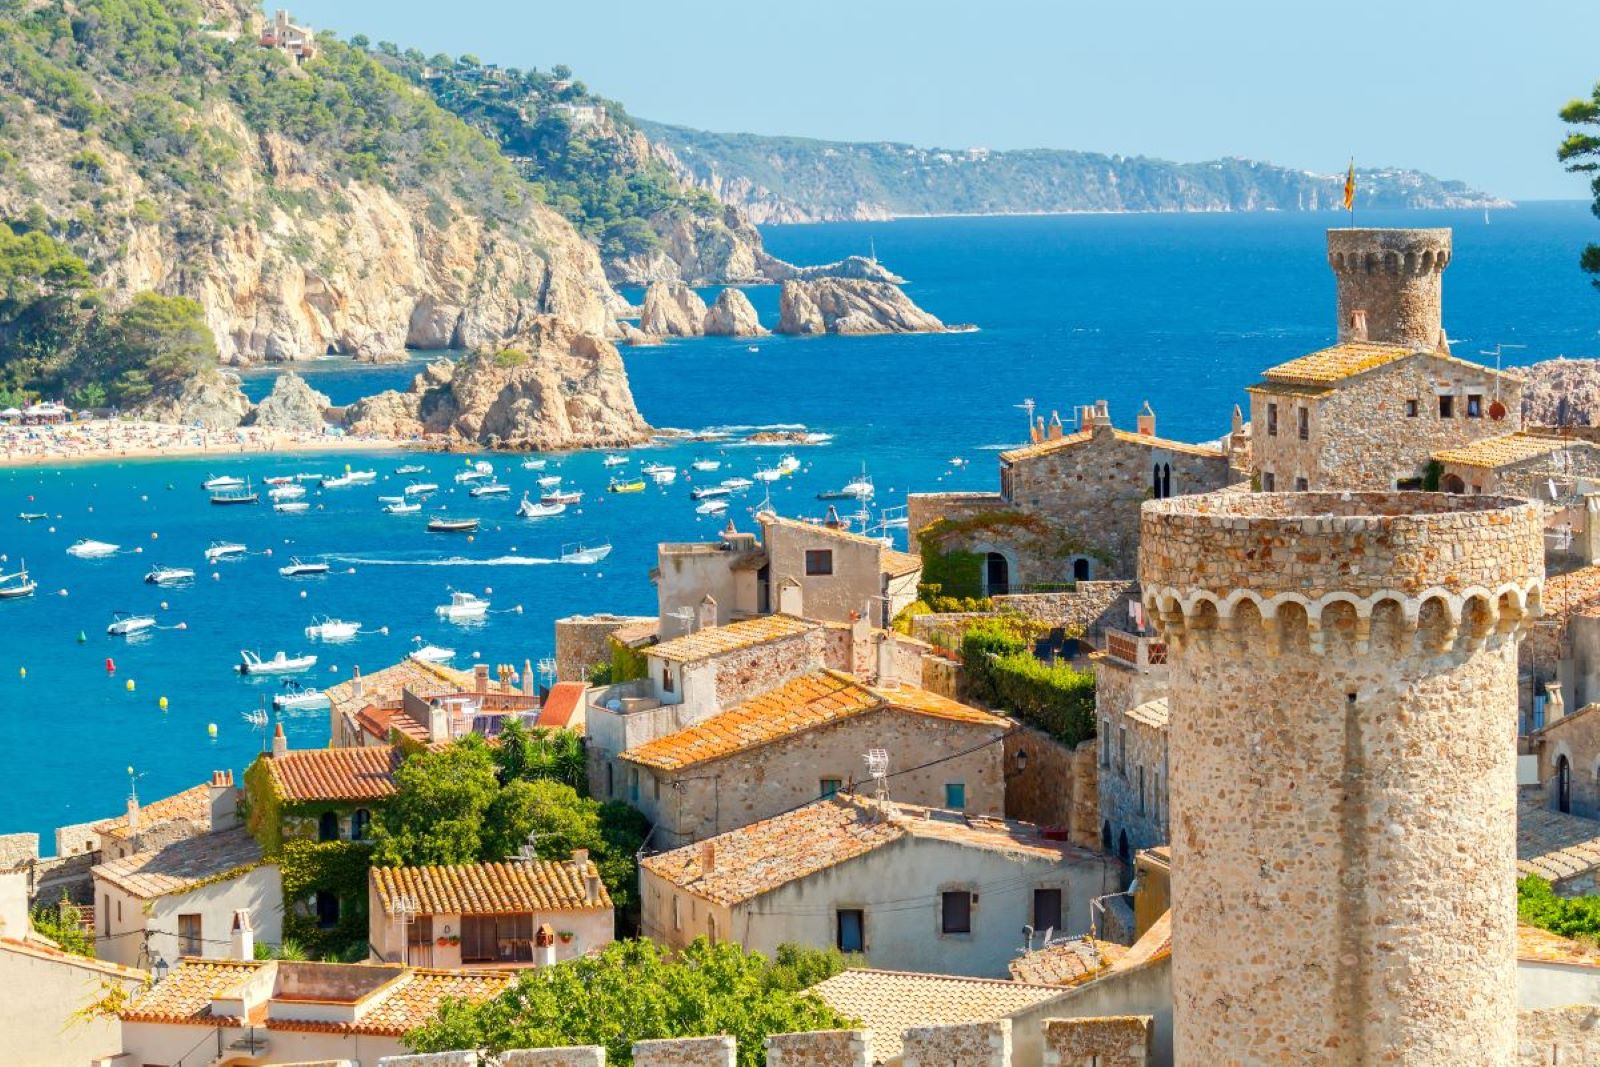 <p class="wp-caption-text">Image Credit: Shutterstock / kavalenkau</p>  <p><span>The Costa Brava, located in the northeastern corner of Spain, is a stunning stretch of coastline known for its rugged beauty, crystal-clear waters, and sandy coves between cliffs. The region extends from the town of Blanes to the French border, offering a diverse landscape that includes the serene beaches of Calella de Palafrugell and the wild, untouched beauty of Cap de Creus Natural Park. The Costa Brava is not just about its beaches; it’s also rich in cultural heritage, with medieval towns like Girona and Pals and the surreal architecture of Salvador Dalí in Figueres and Cadaqués. The area is renowned for its culinary excellence, with several Michelin-starred restaurants and local dishes that highlight Catalonia’s rich gastronomic tradition.</span></p> <p><b>Insider’s Tip: </b><span>Visit the medieval village of Peratallada, a lesser-known gem with beautifully preserved stone architecture, artisan shops, and quaint restaurants offering traditional Catalan cuisine.</span></p> <p><b>When to Travel: </b><span>The best time to visit the Costa Brava is from May to June and September to October, when the weather is pleasant, and the summer crowds have dissipated.</span></p> <p><b>How to Get There: </b><span>The nearest major airport is in Barcelona, from which the Costa Brava is easily accessible by car, bus, or train. Renting a car is recommended for exploring the region’s more secluded beaches and historic towns.</span></p>